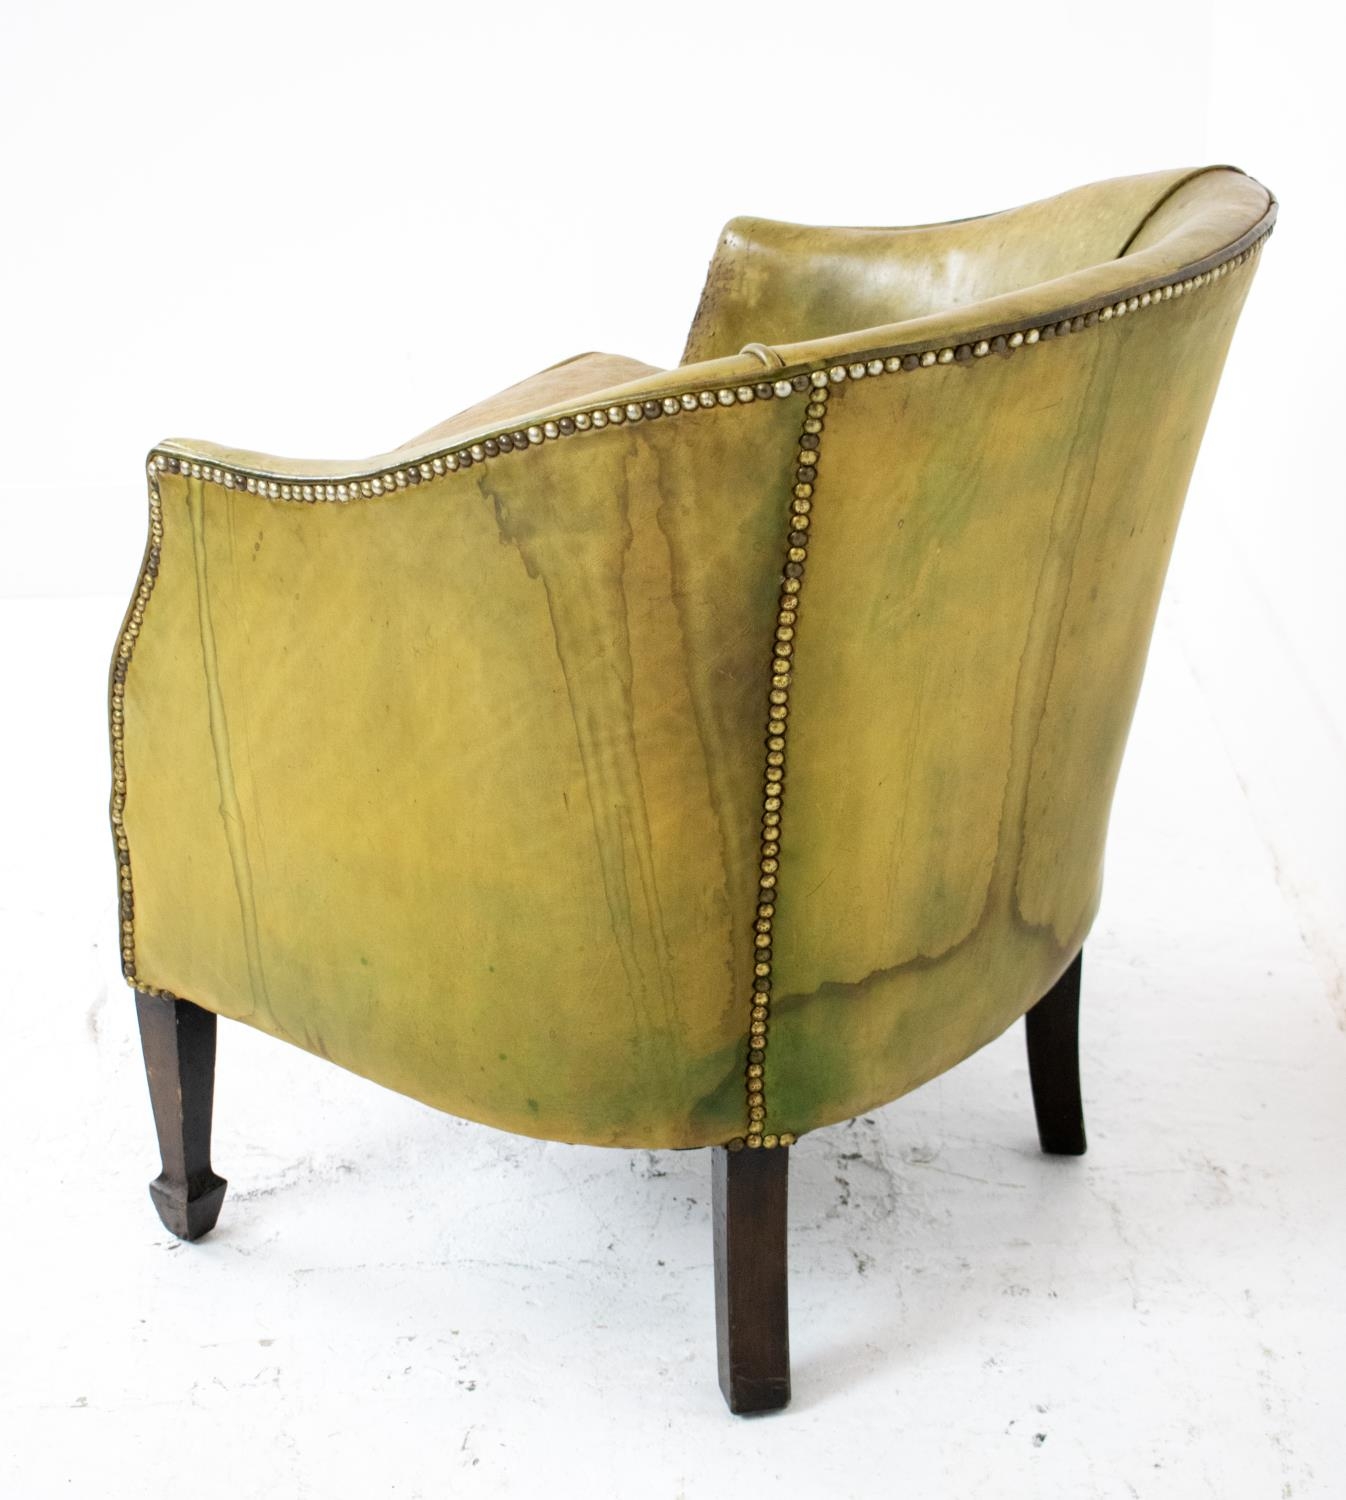 TUB CHAIR, Edwardian in leather with cushion seat, 74cm x 61cm x 65cm. - Image 4 of 4